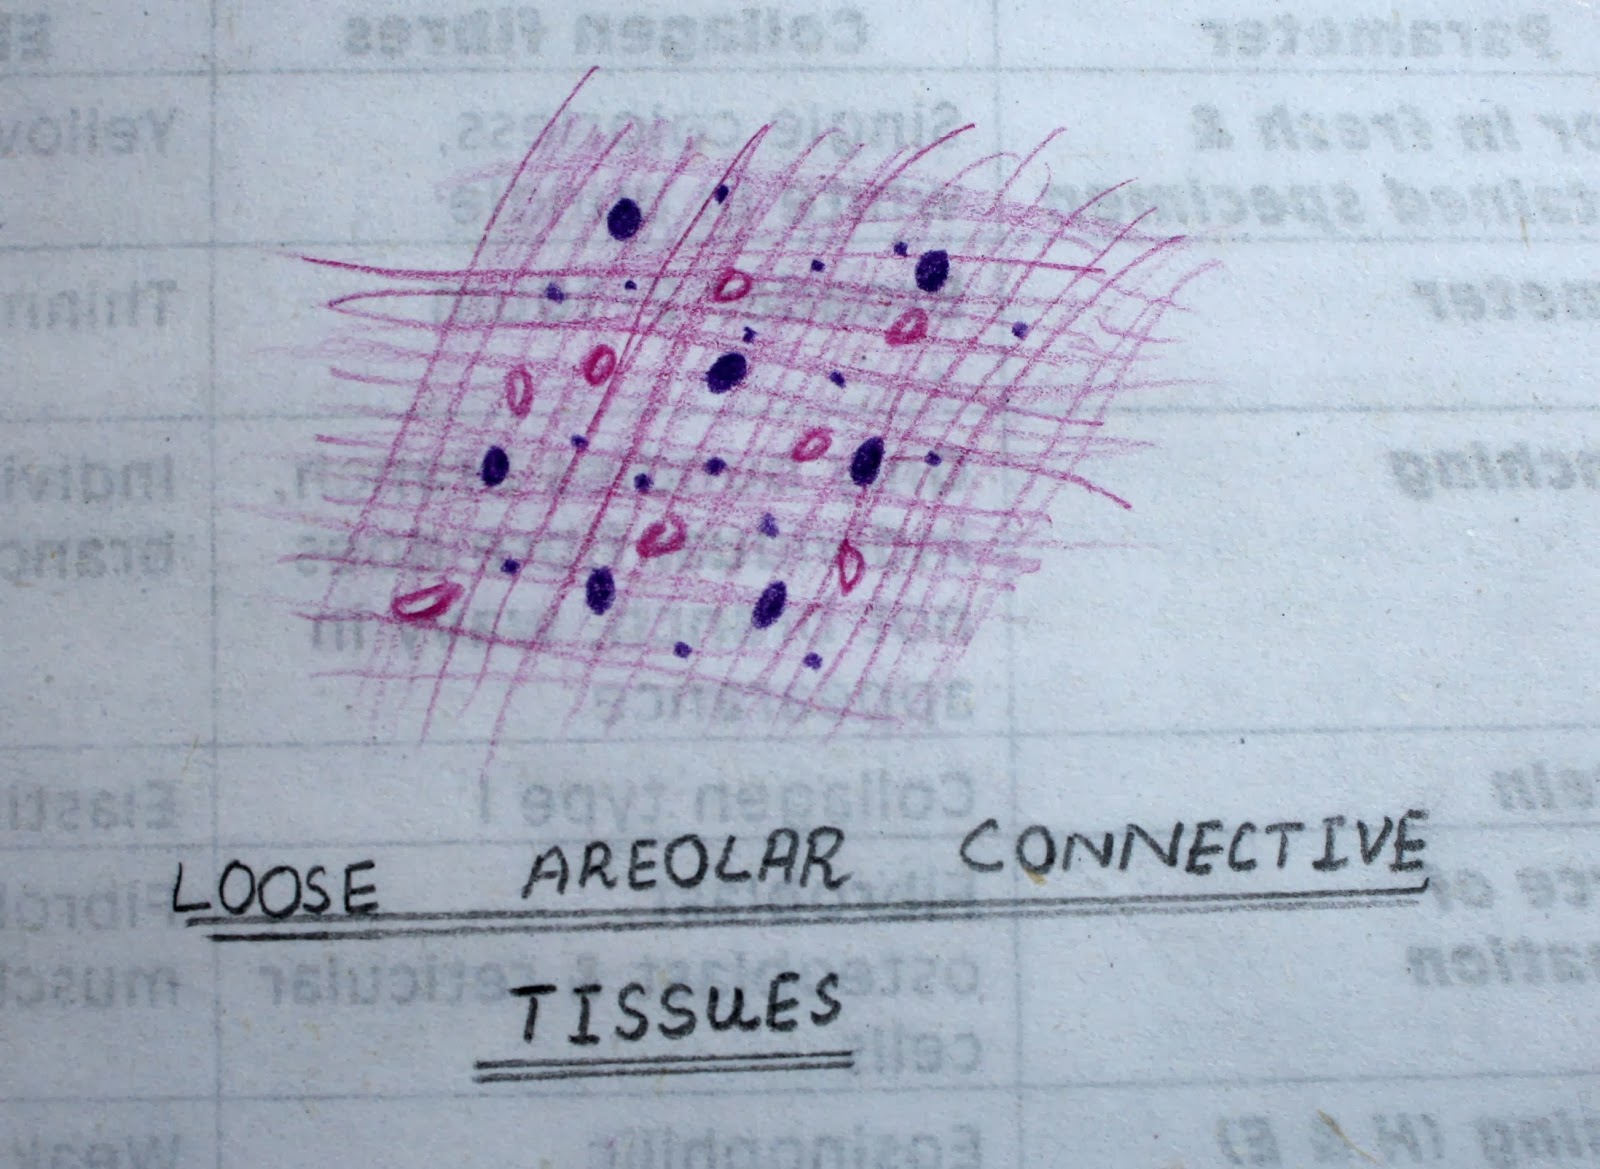 [loose%2520areolar%2520connective%2520tissue%2520%2520high%2520resolution%2520histology%2520diagram%255B3%255D.jpg]